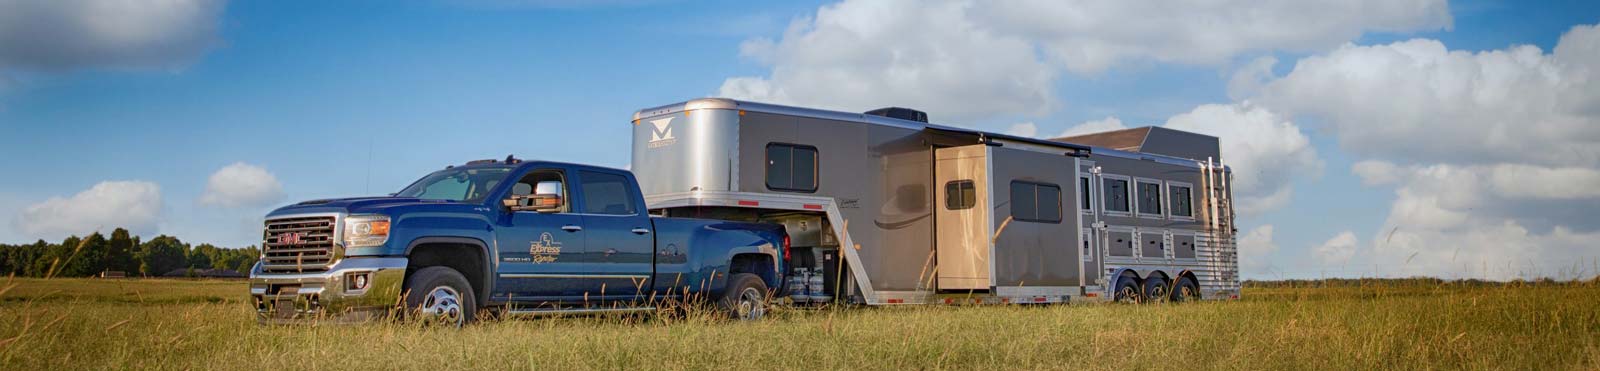 High-quality horse trailer with durable construction and modern design